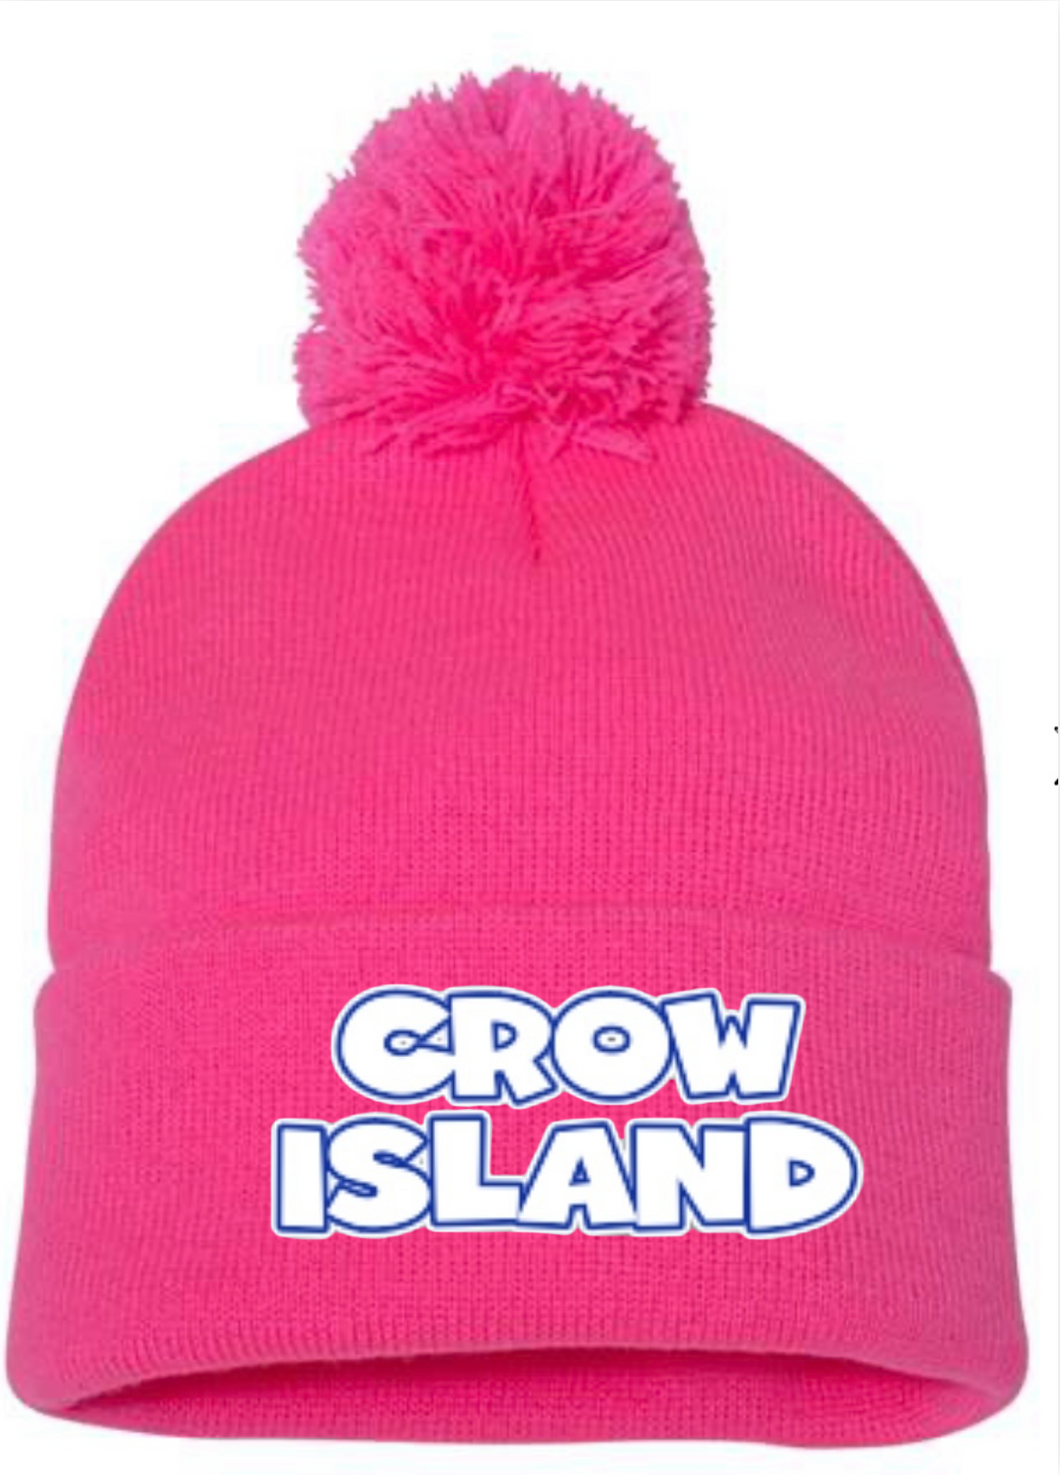 Crow Island Pink Pom Beanie - Order by 11/20 for Book Fair Delivery